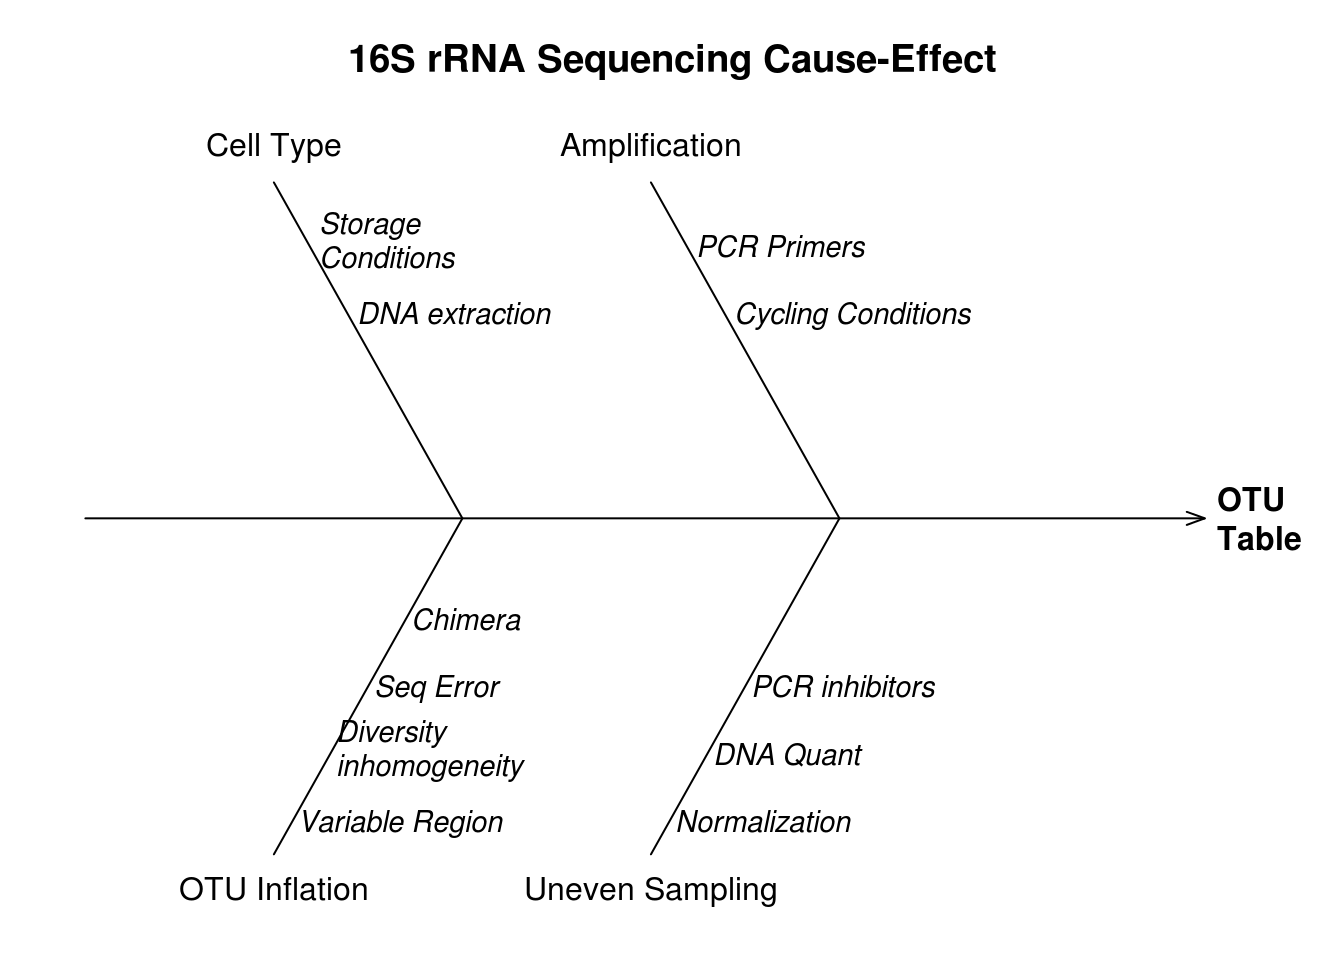 Causes (branch labels) of bias and variability indicated for different sources of error (branch text).